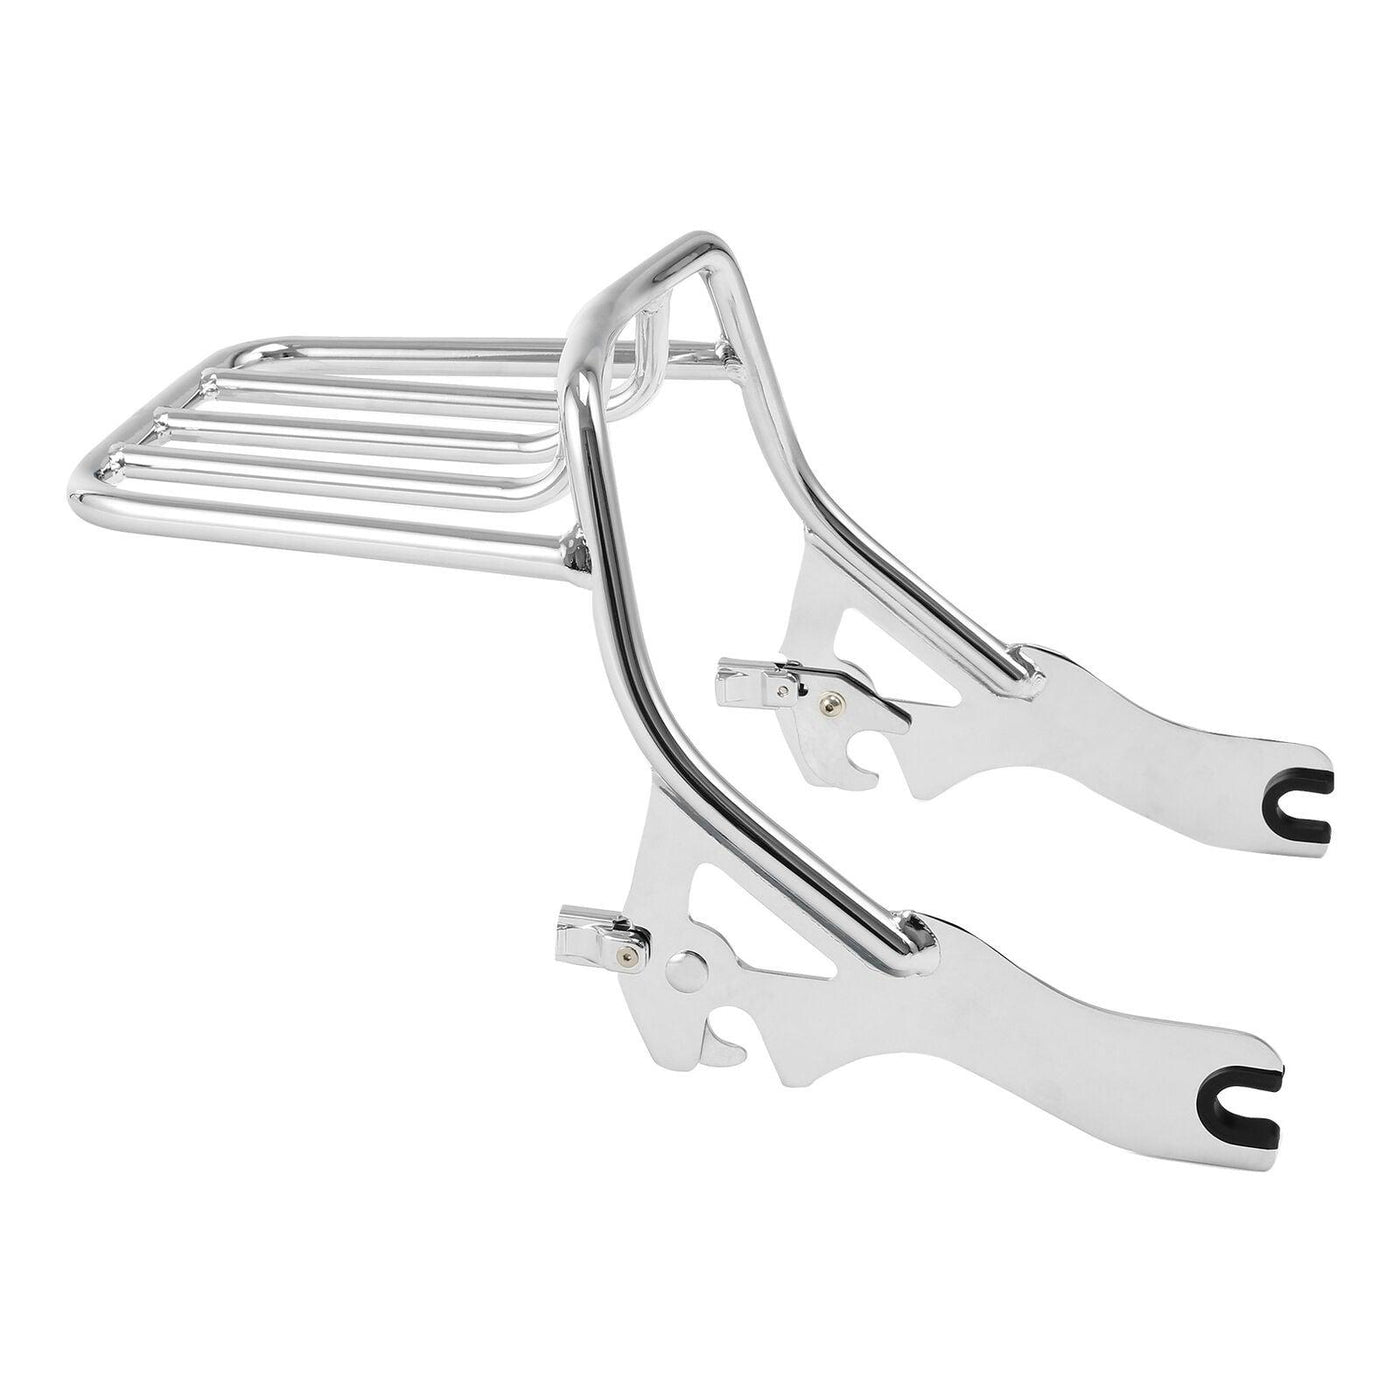 Chrome Two-up Luggage Rack Fit For Harley Softail Street Bob Slim 2018-2021 - Moto Life Products